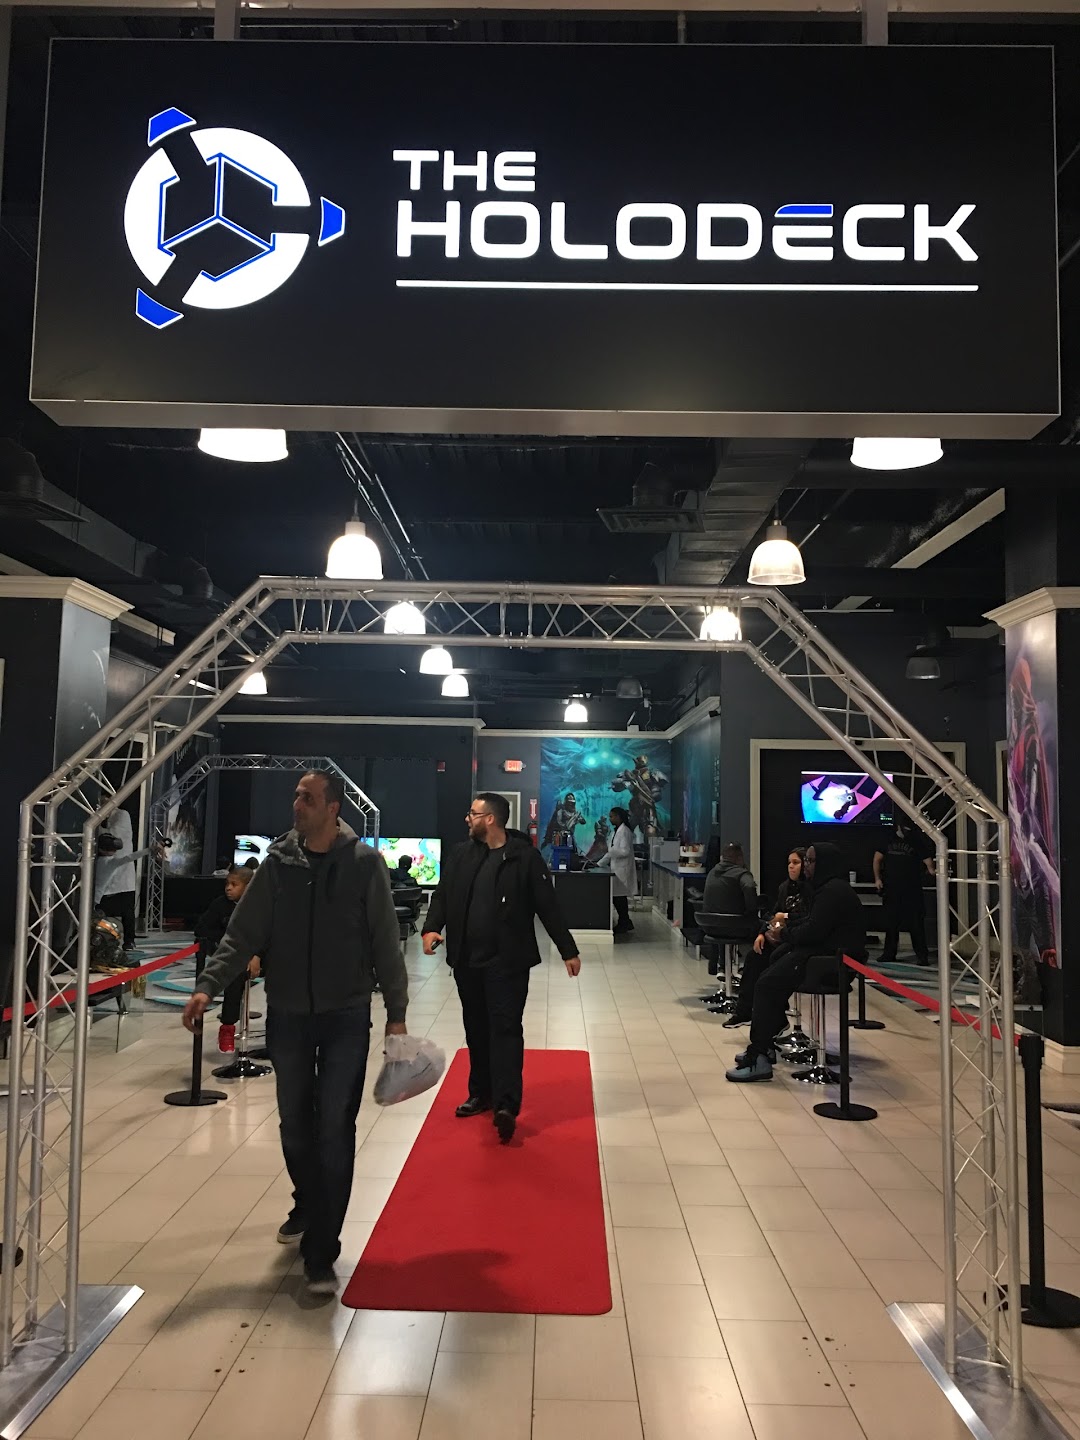 The Holodeck